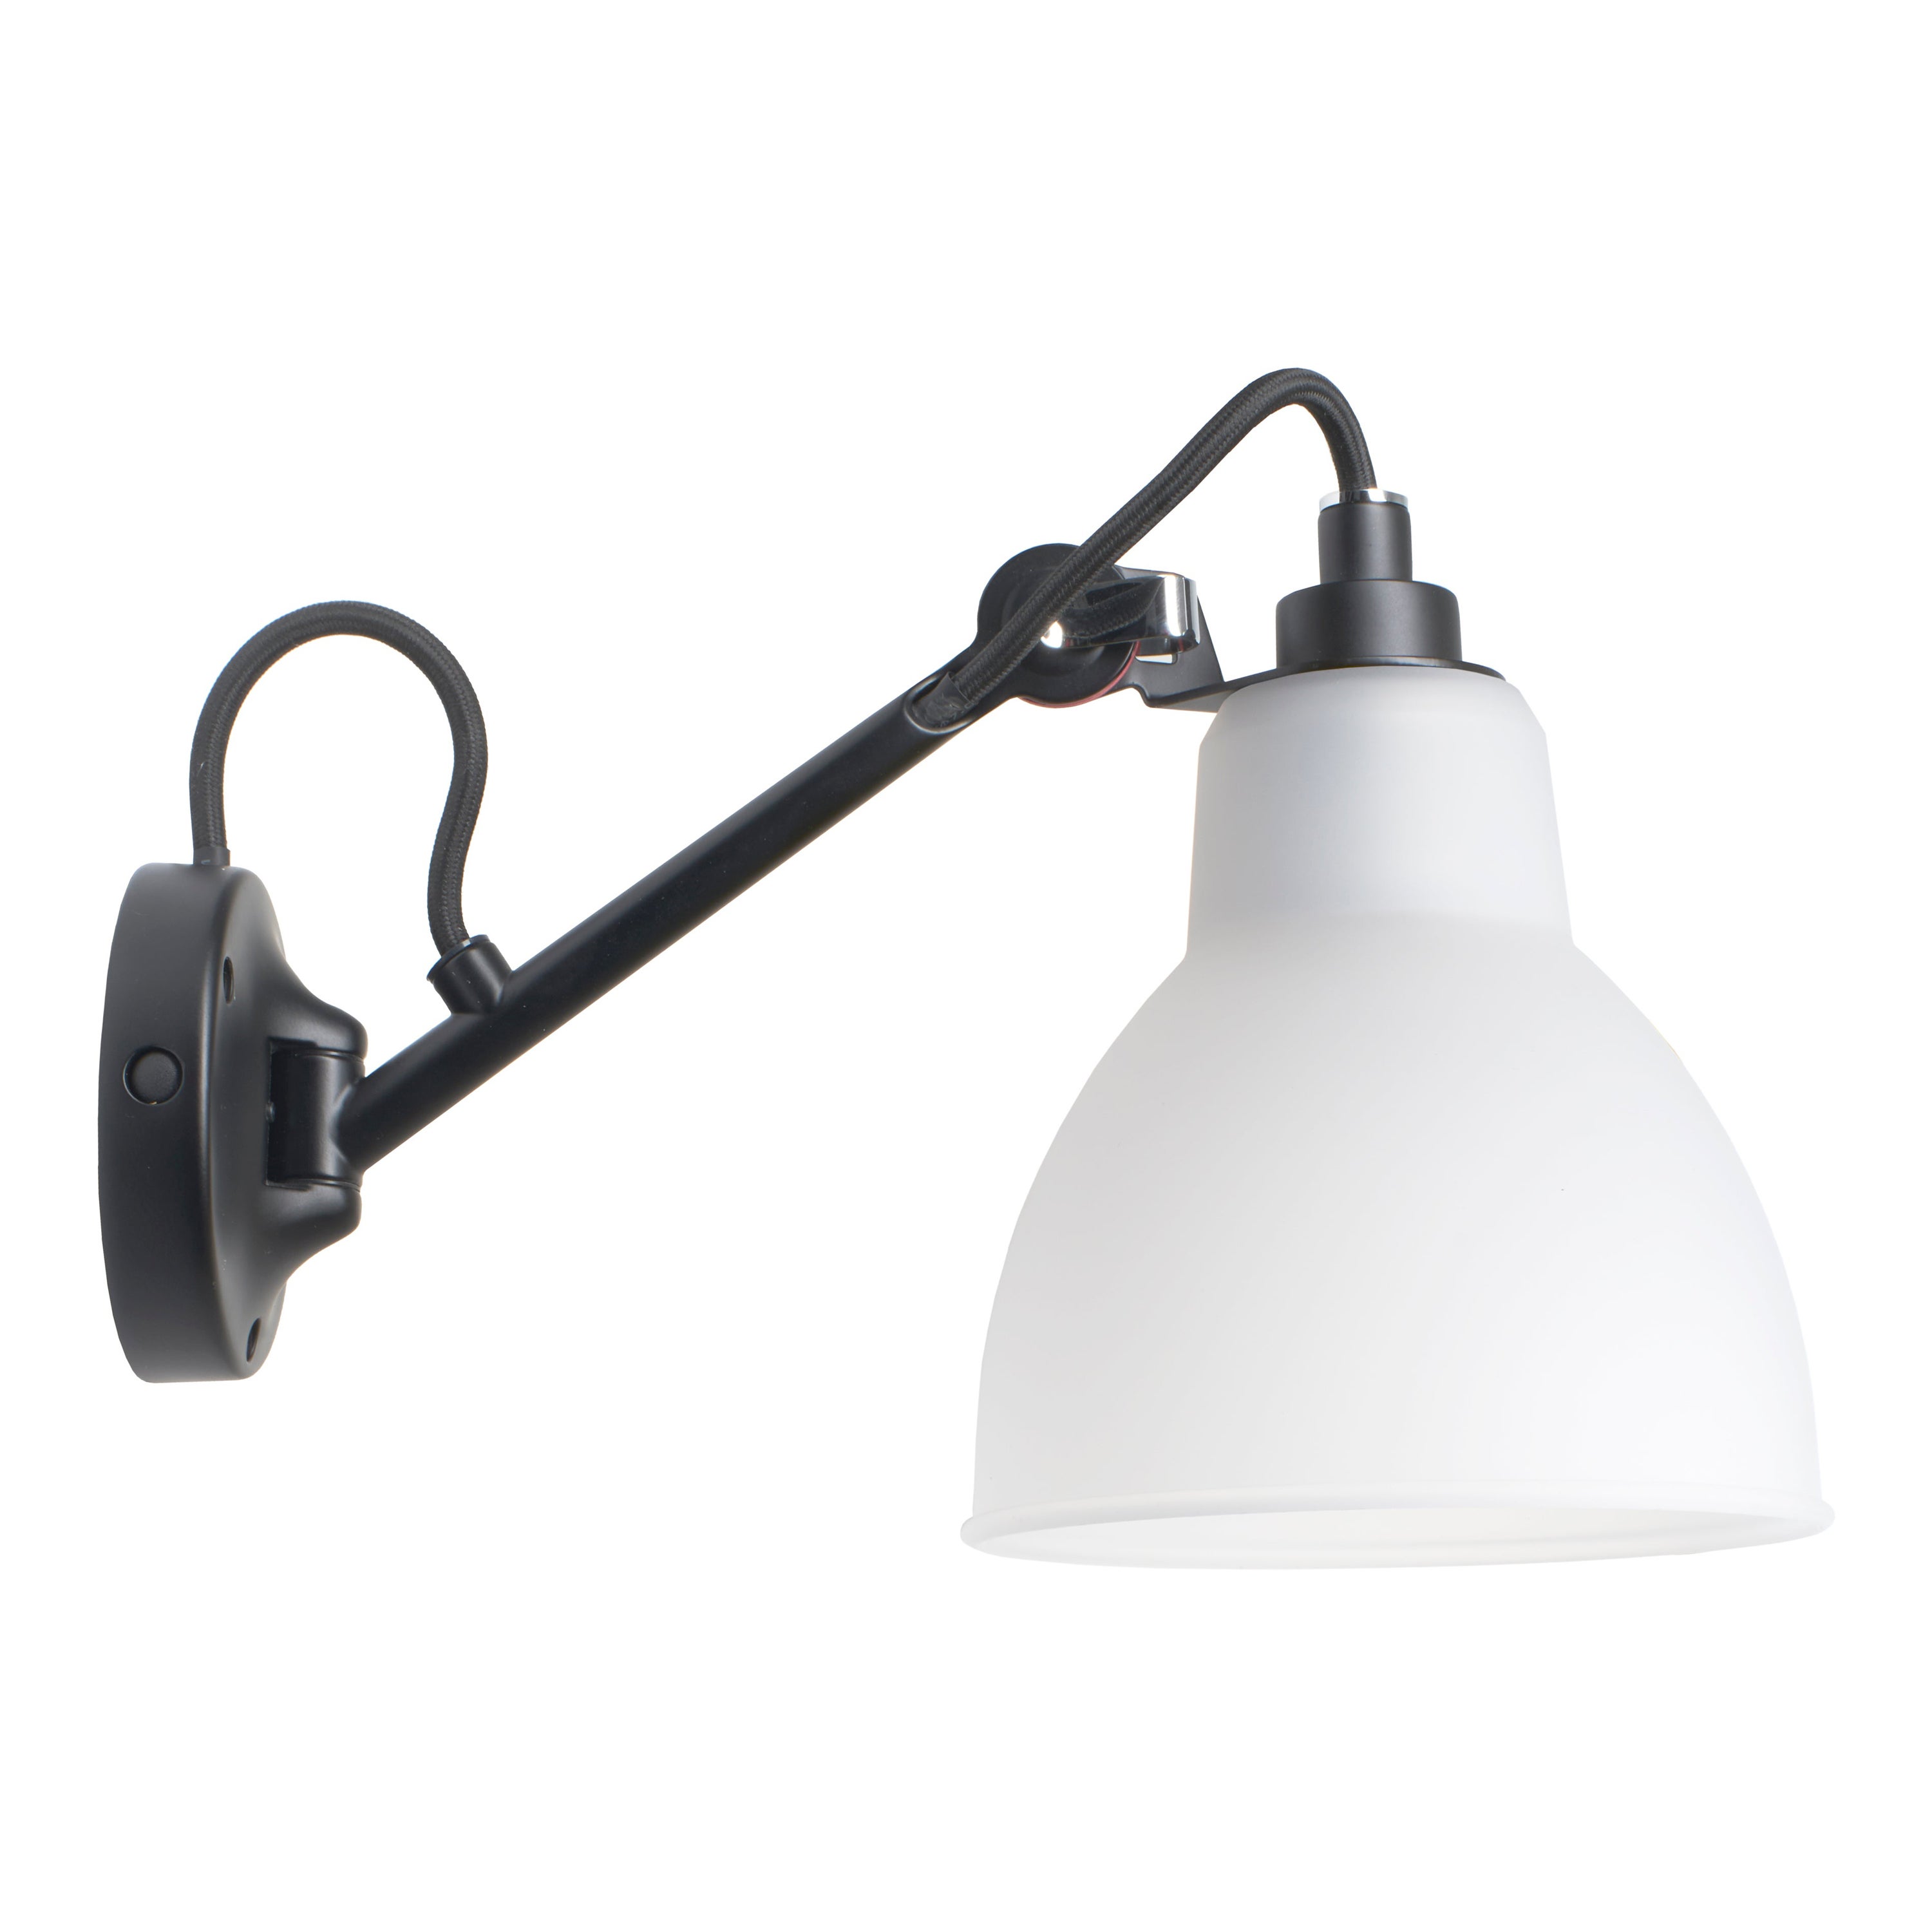 DCW Editions La Lampe Gras N°104 Wall Lamp in Black Arm and Polycarbonate Shade For Sale